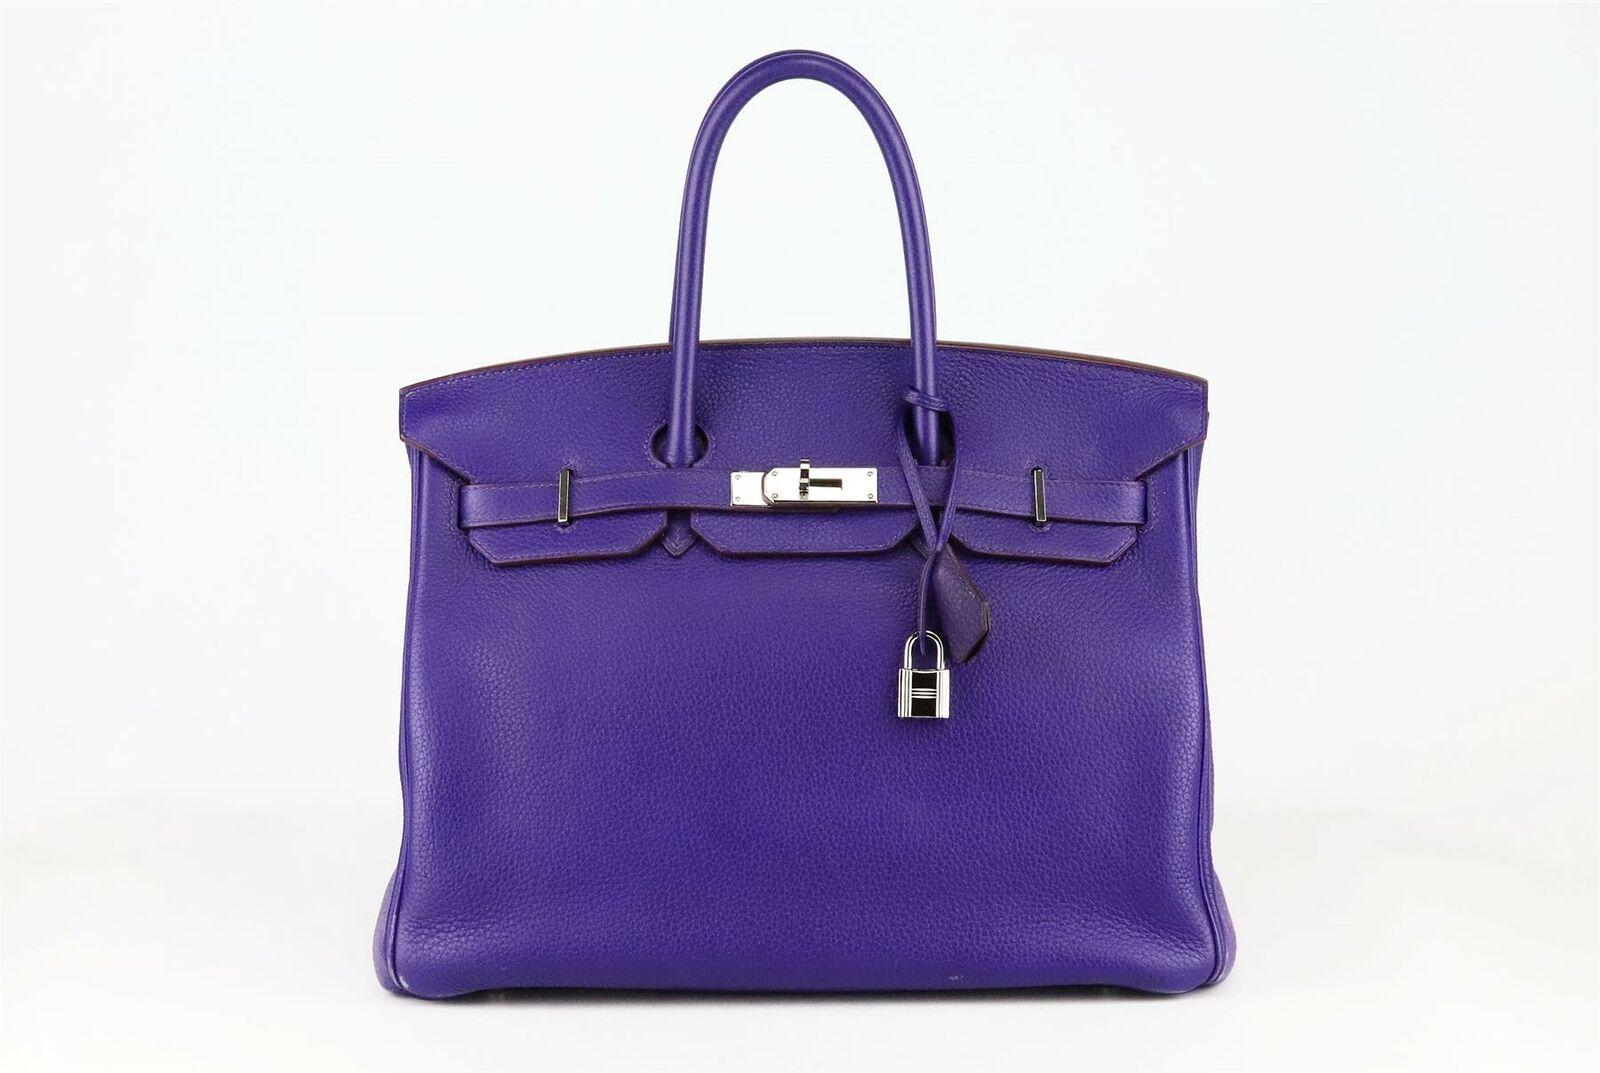 Made in France, this beautiful 2010 Hermès ‘Birkin’ 30cm handbag has been made from ‘Togo’ leather exterior in a purple/blue hue and matching leather interior, this piece is decorated with palladium hardware on the front and finished with top